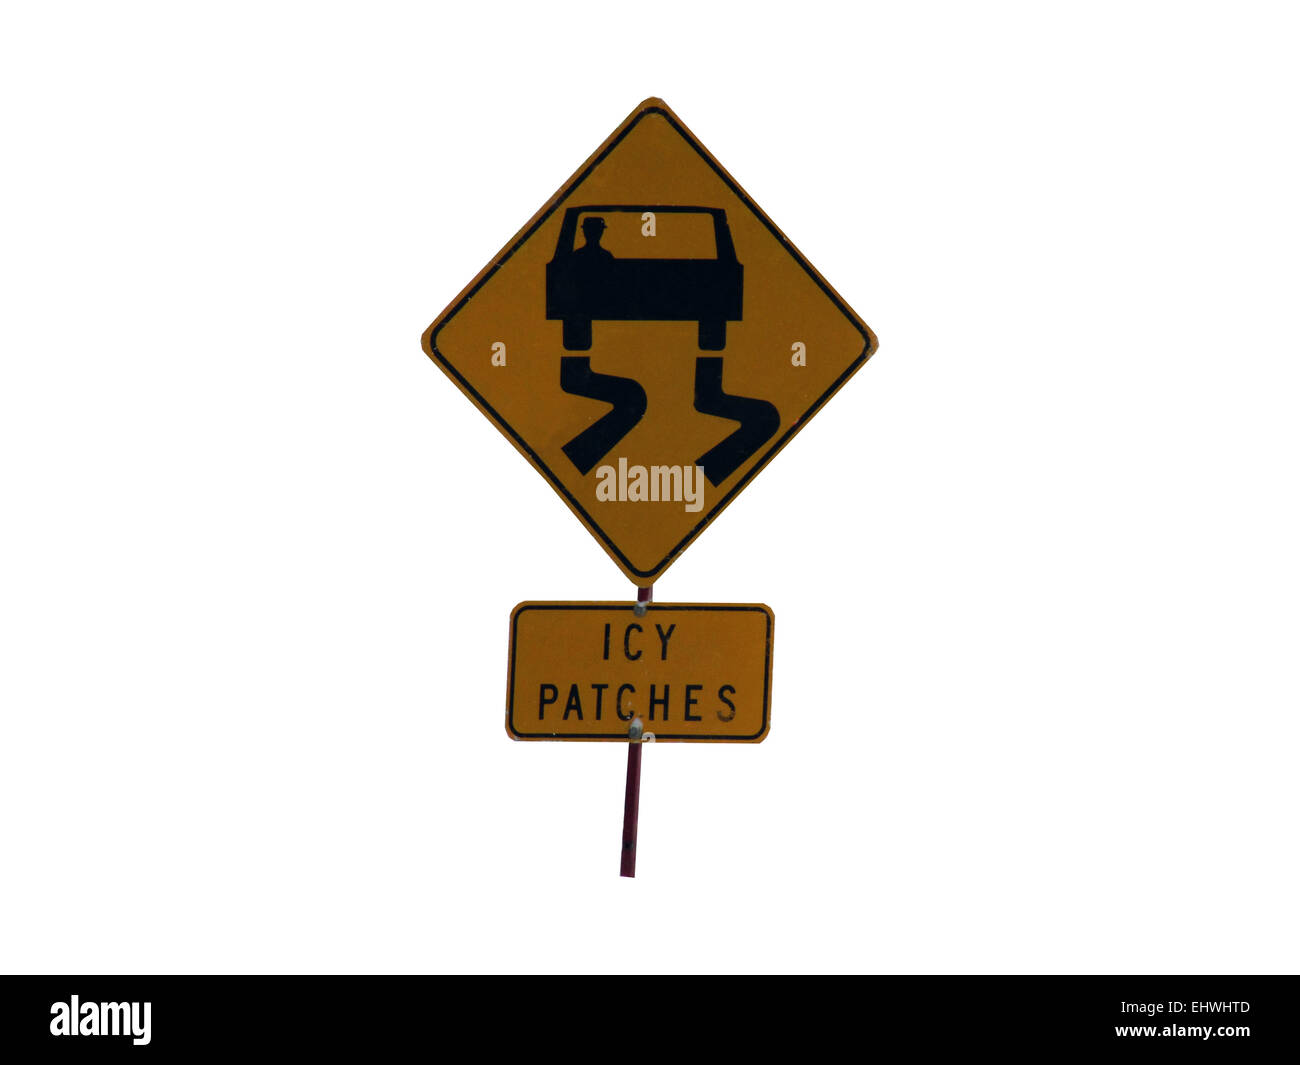 Icy patches road warning sign Stock Photo